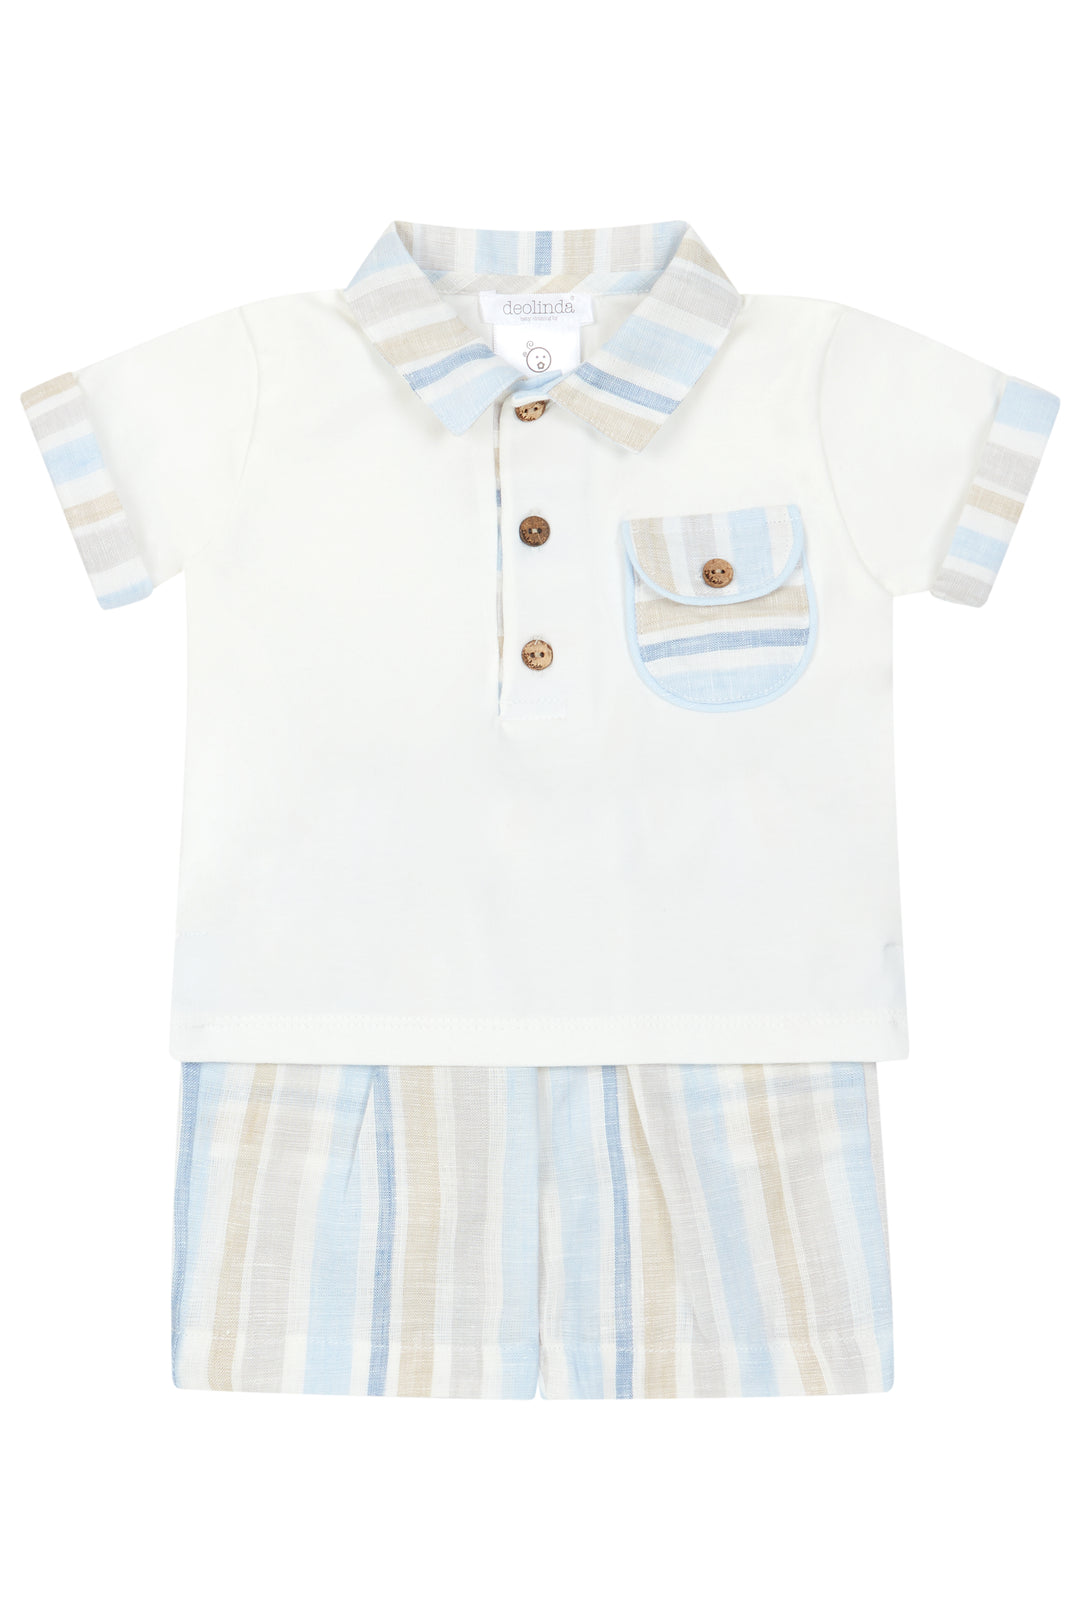 Chic by Deolinda PREORDER "Gideon" Blue Striped Polo Shirt & Shorts | Millie and John